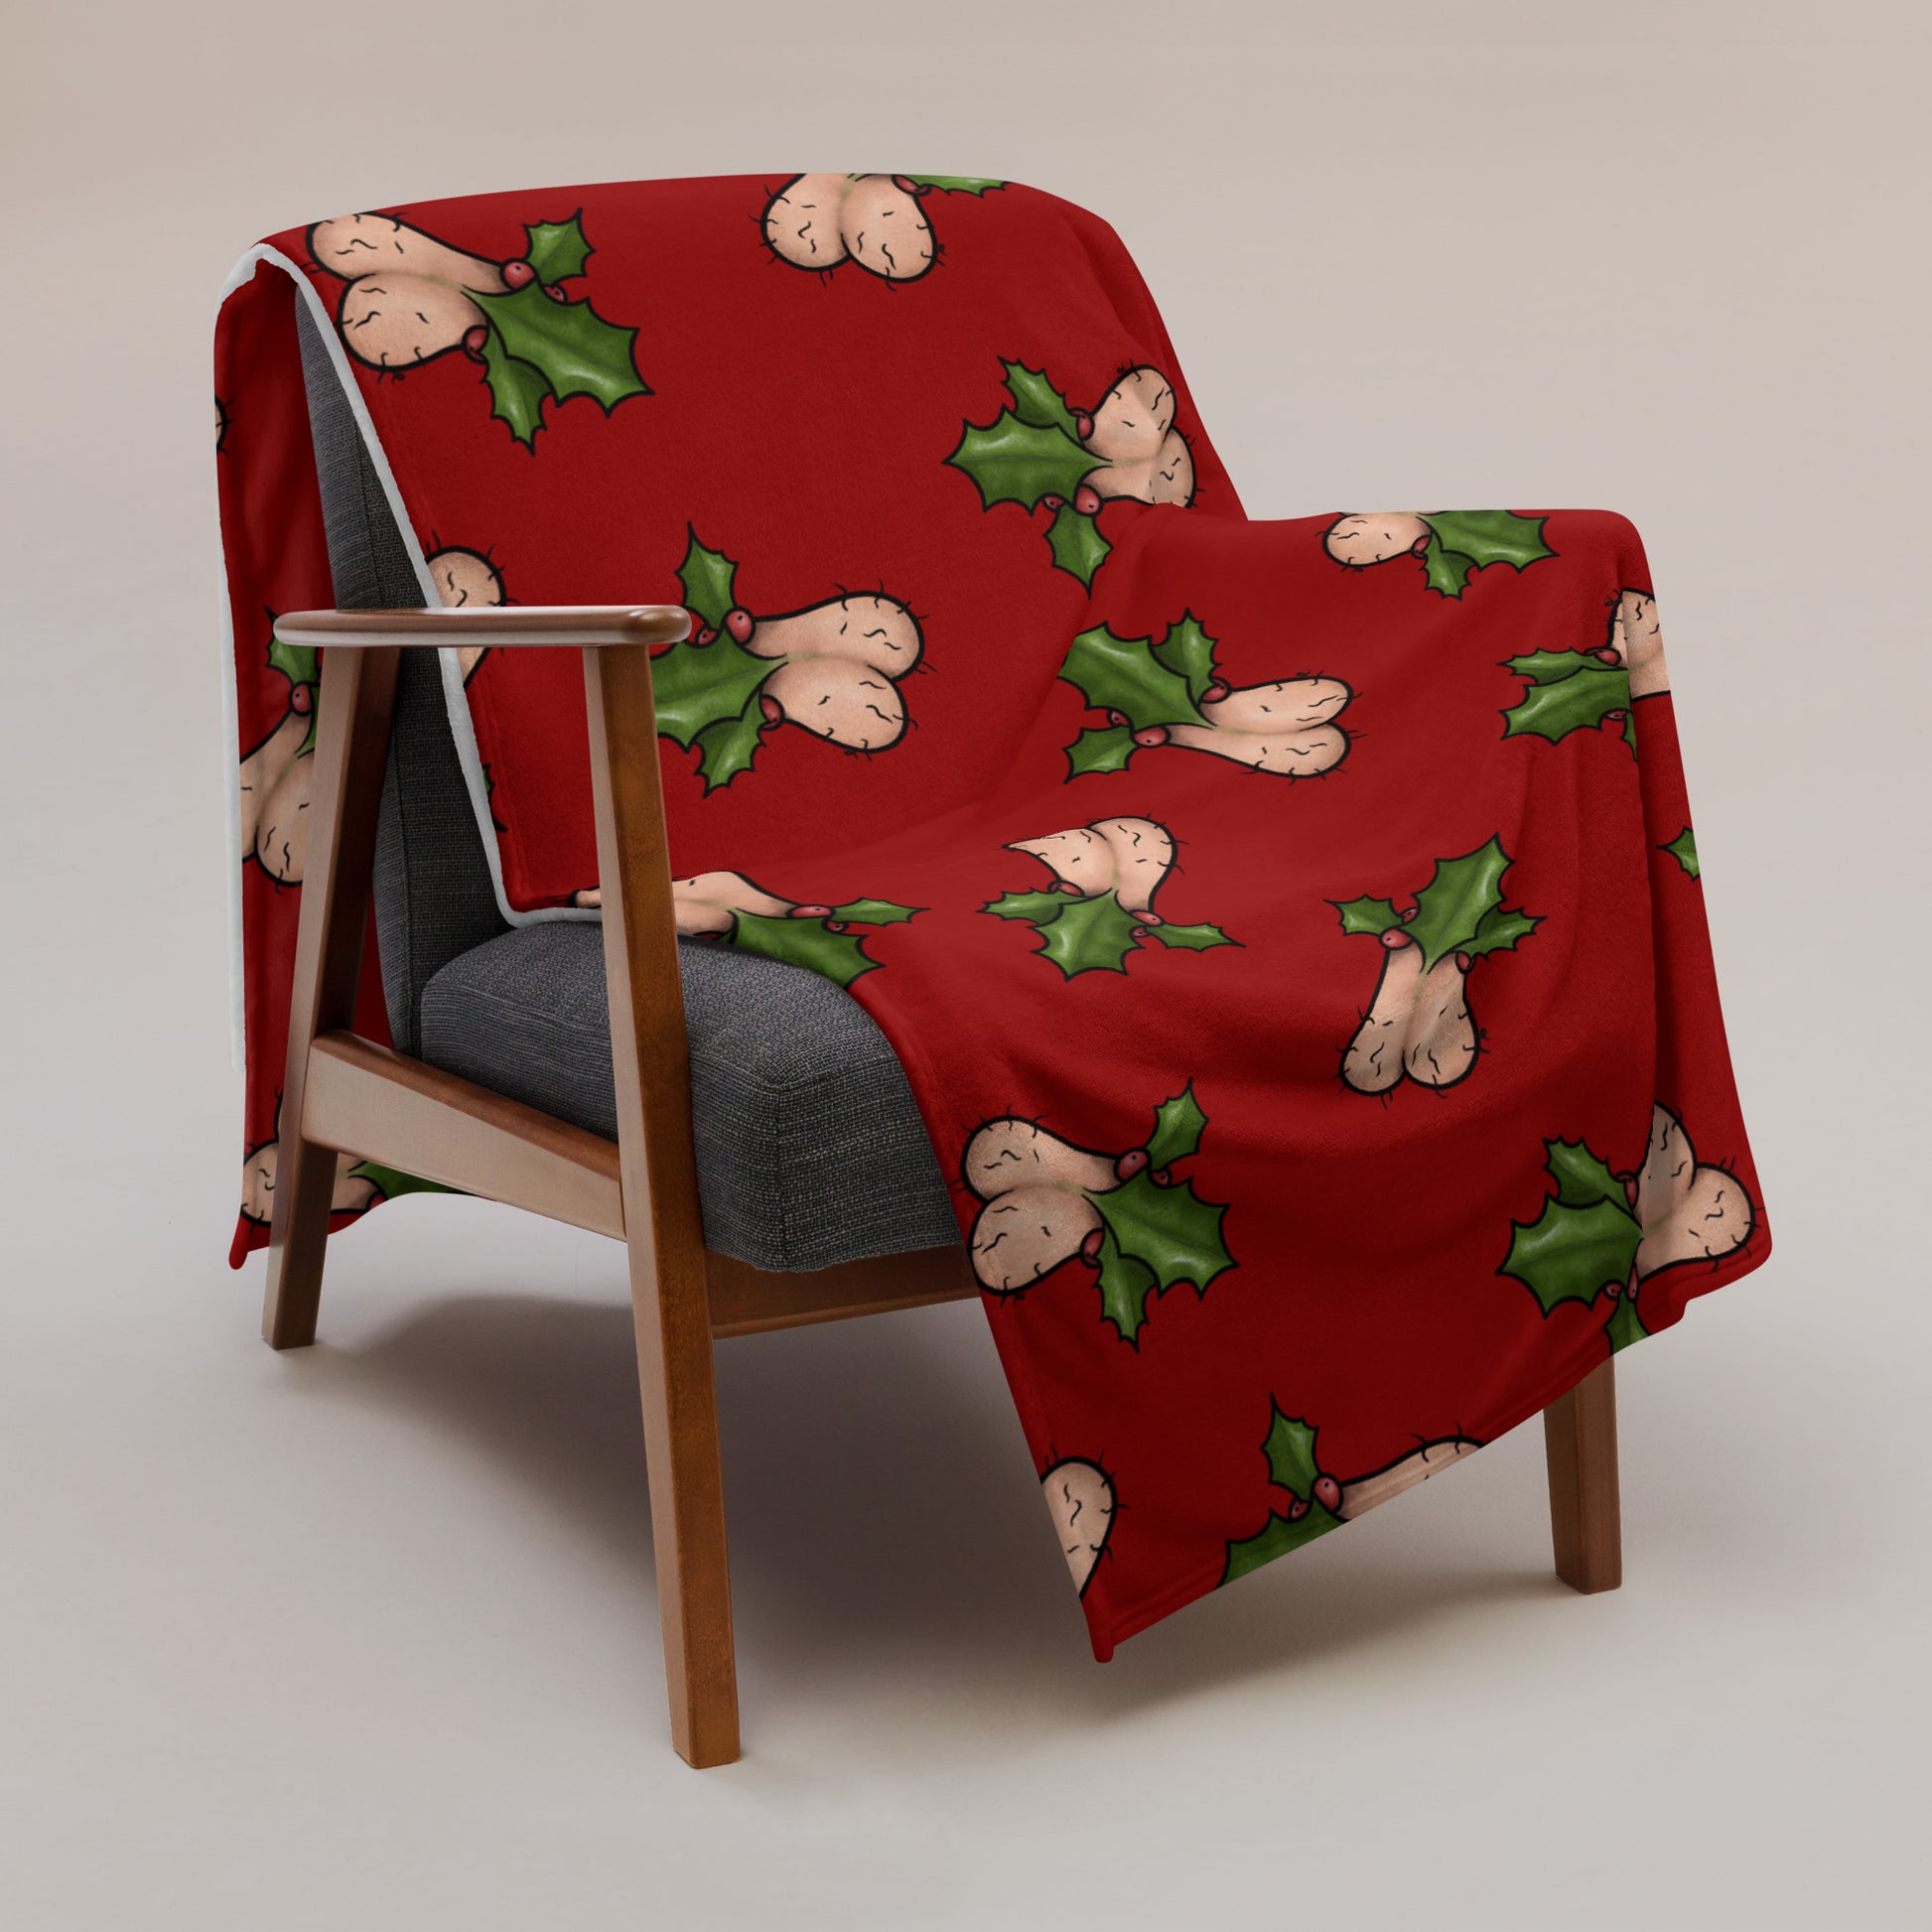 image of  Jingle Balls blanket draped over a chair with repeated pattern of Christmas testicles with holly and berries on a red background